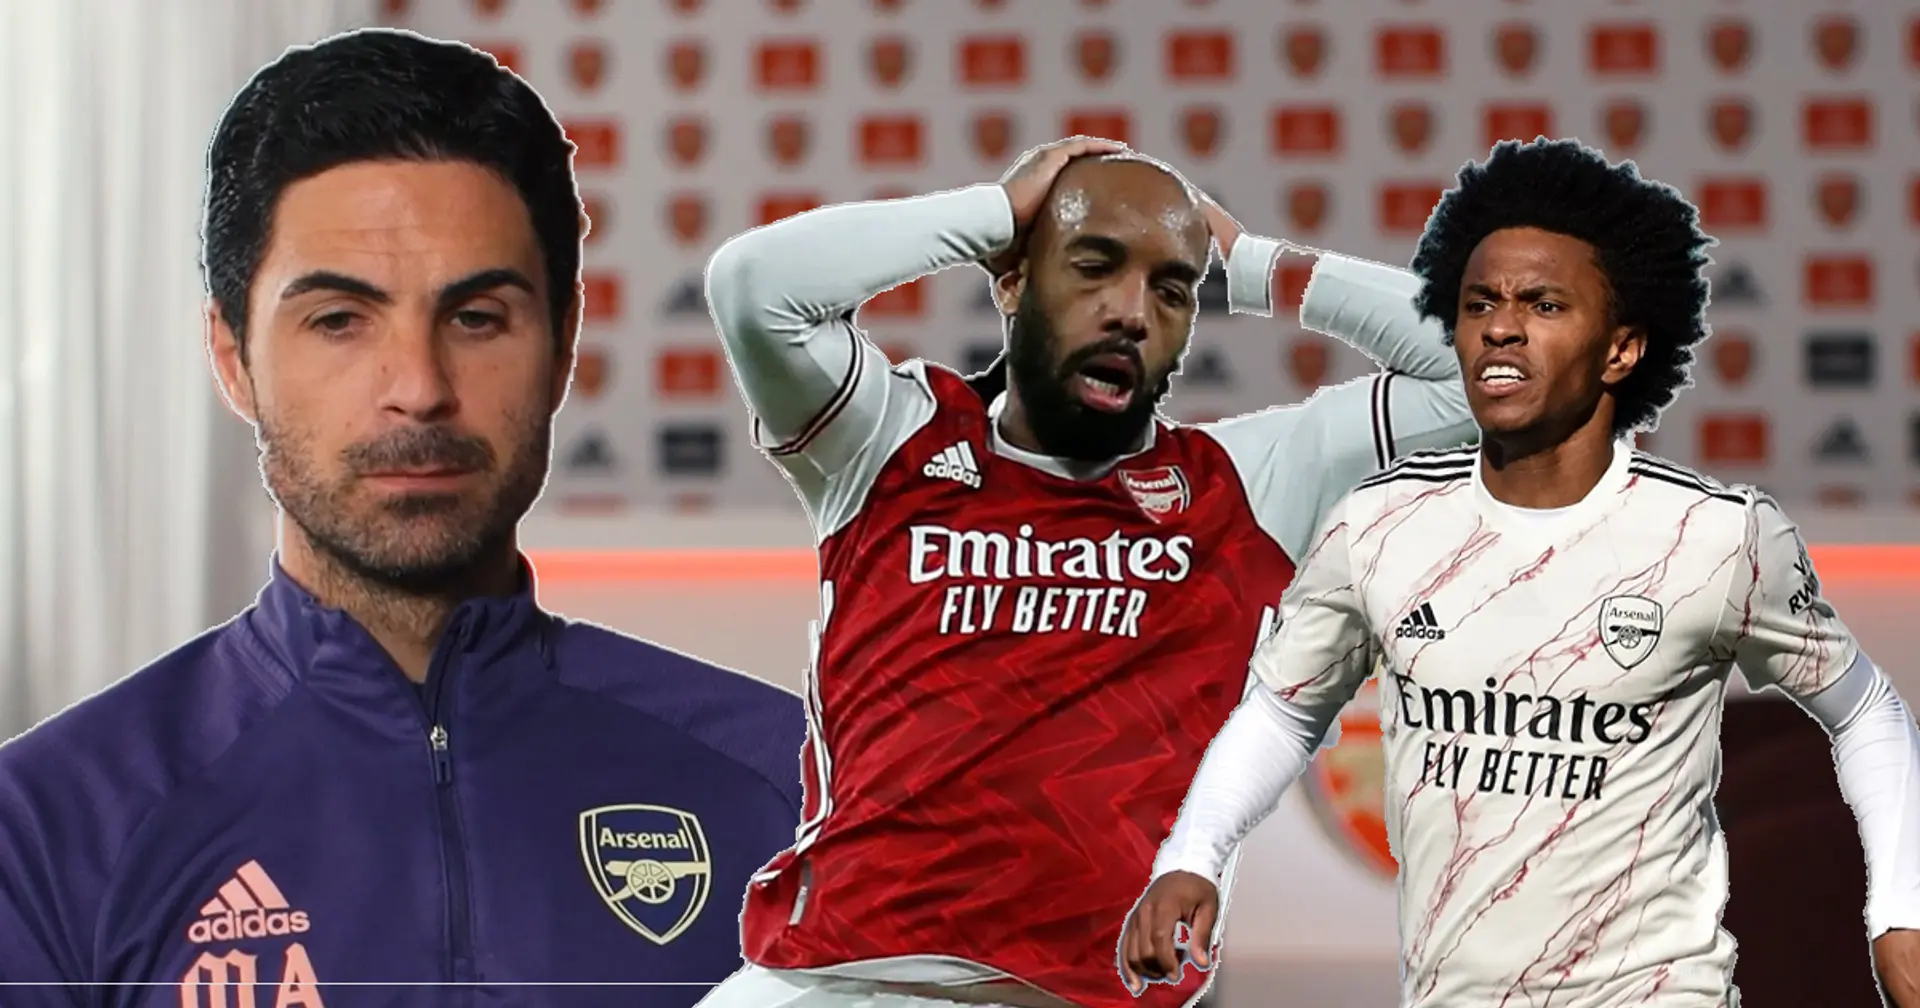 Willian, Lacazette & 12 more players who should leave Arsenal as Arteta confirms massive summer clearout